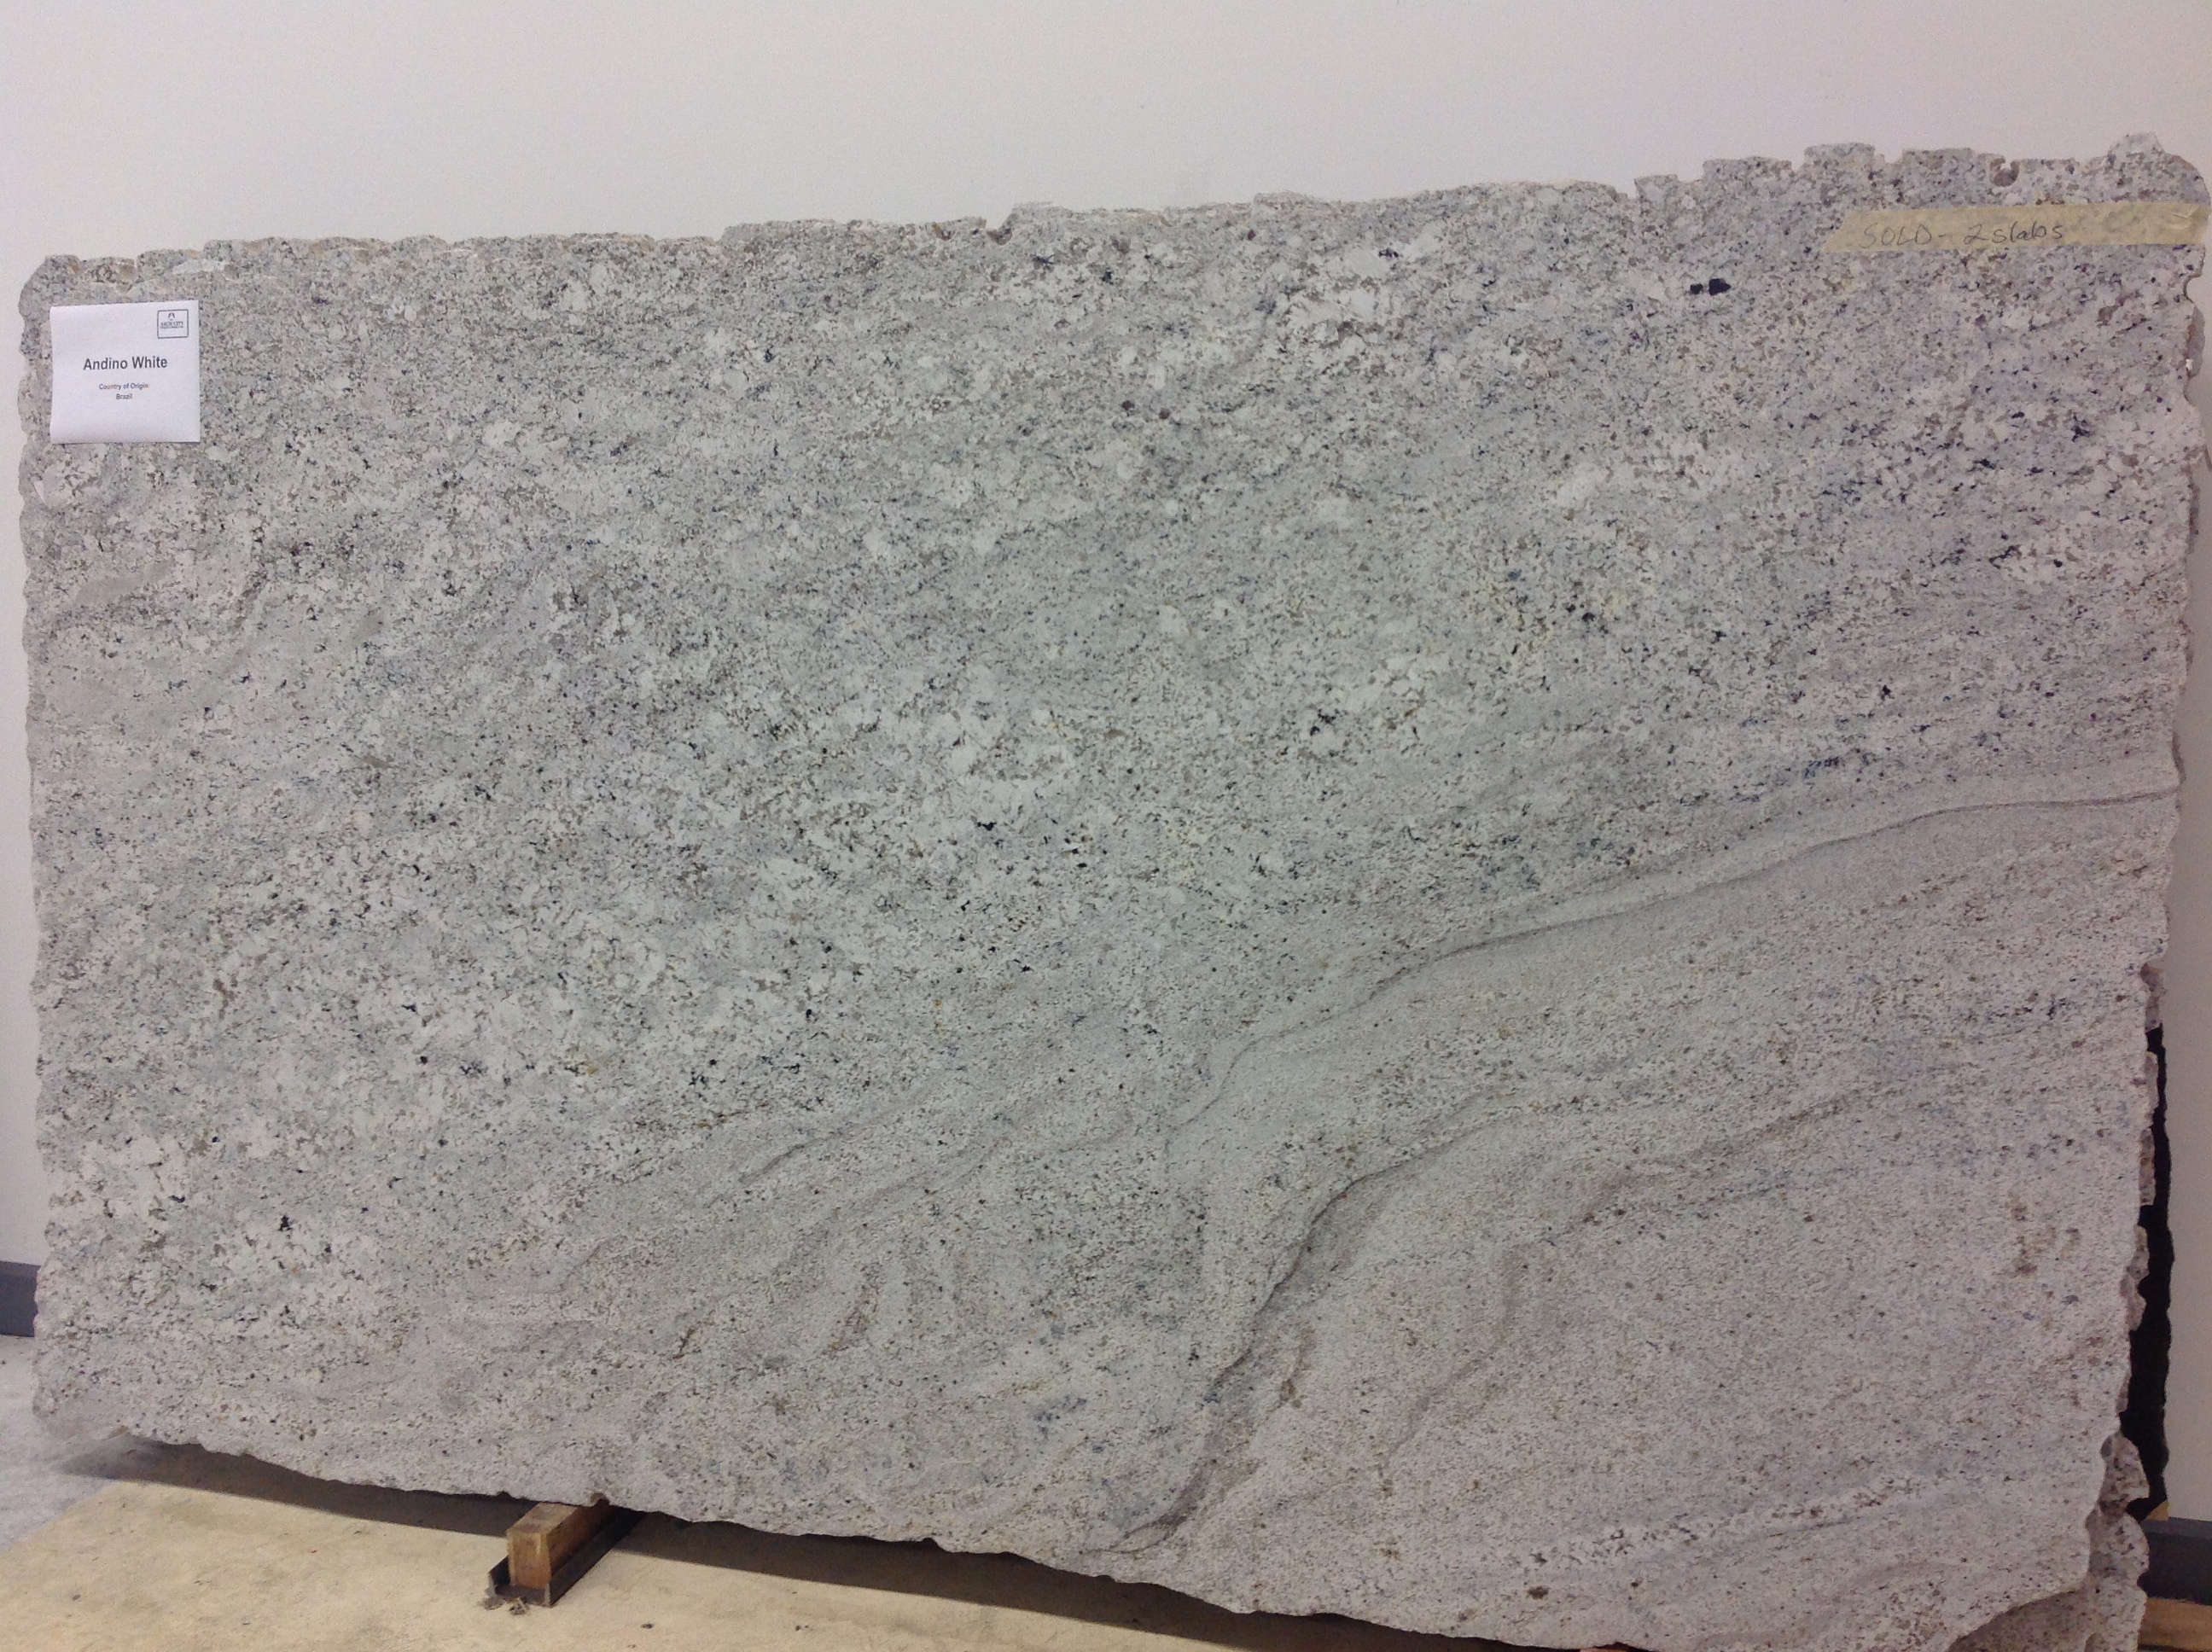 Andino White Granite An Affordable Luxury for Kitchen